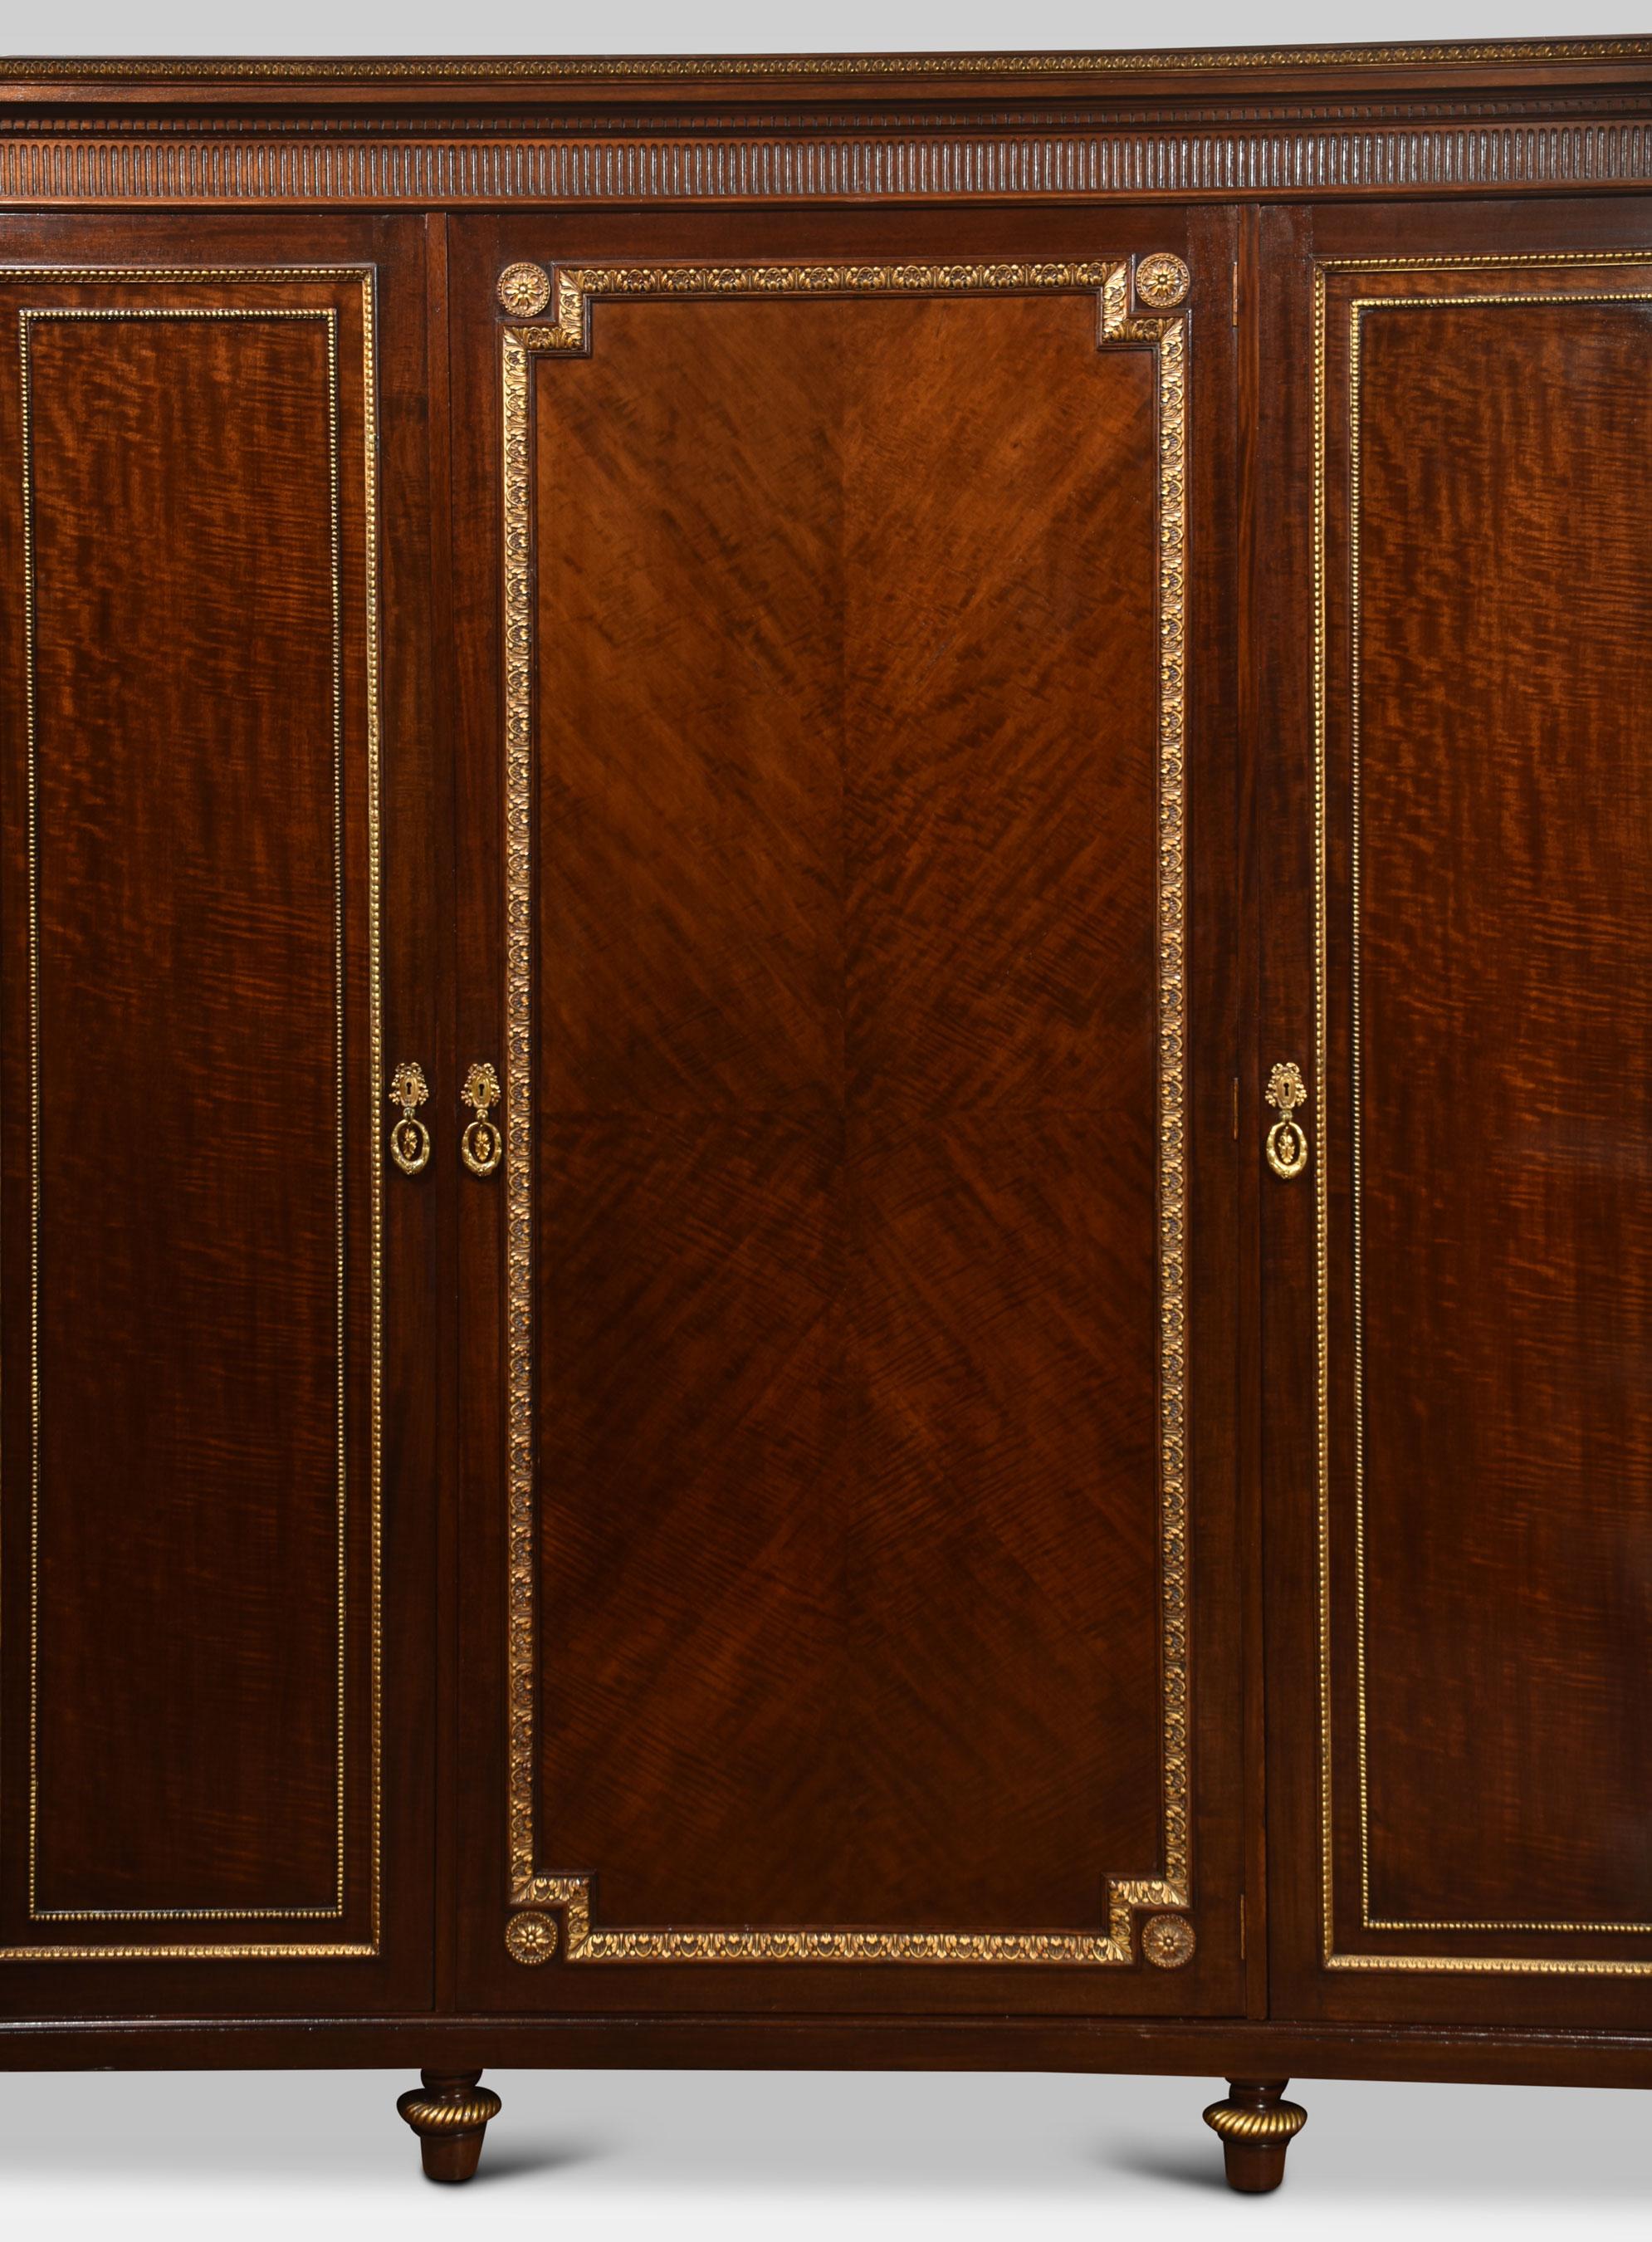 Mahogany wardrobe the carved moulded cornice above three long well figured mahogany doors with gilt-wood moulding. Opening to reveal a fitted interior with drawers, sliding trays and two large hanging areas. All raised up on turned